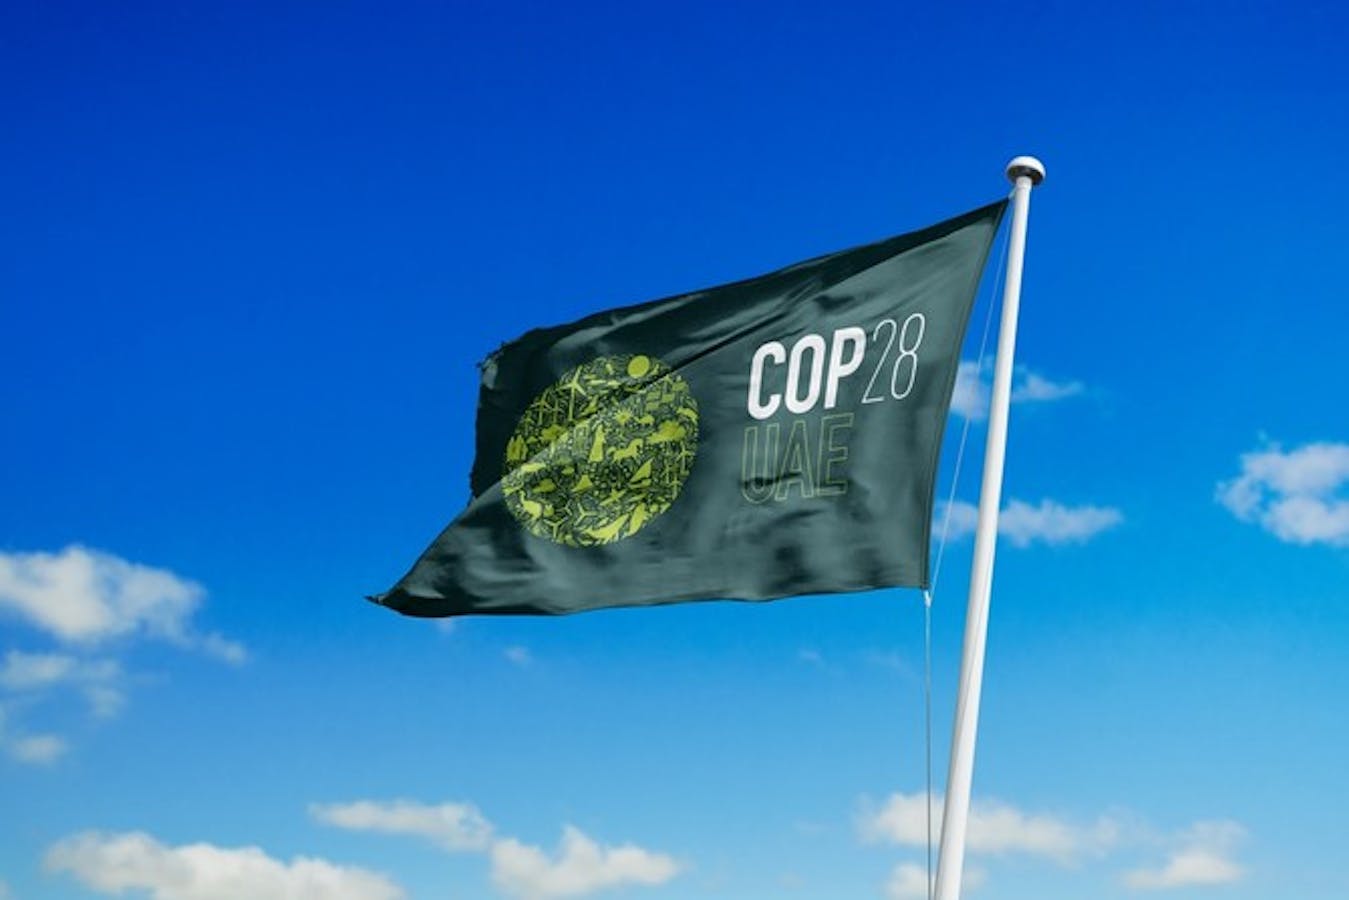 The Paradox of COP28 in the UAE